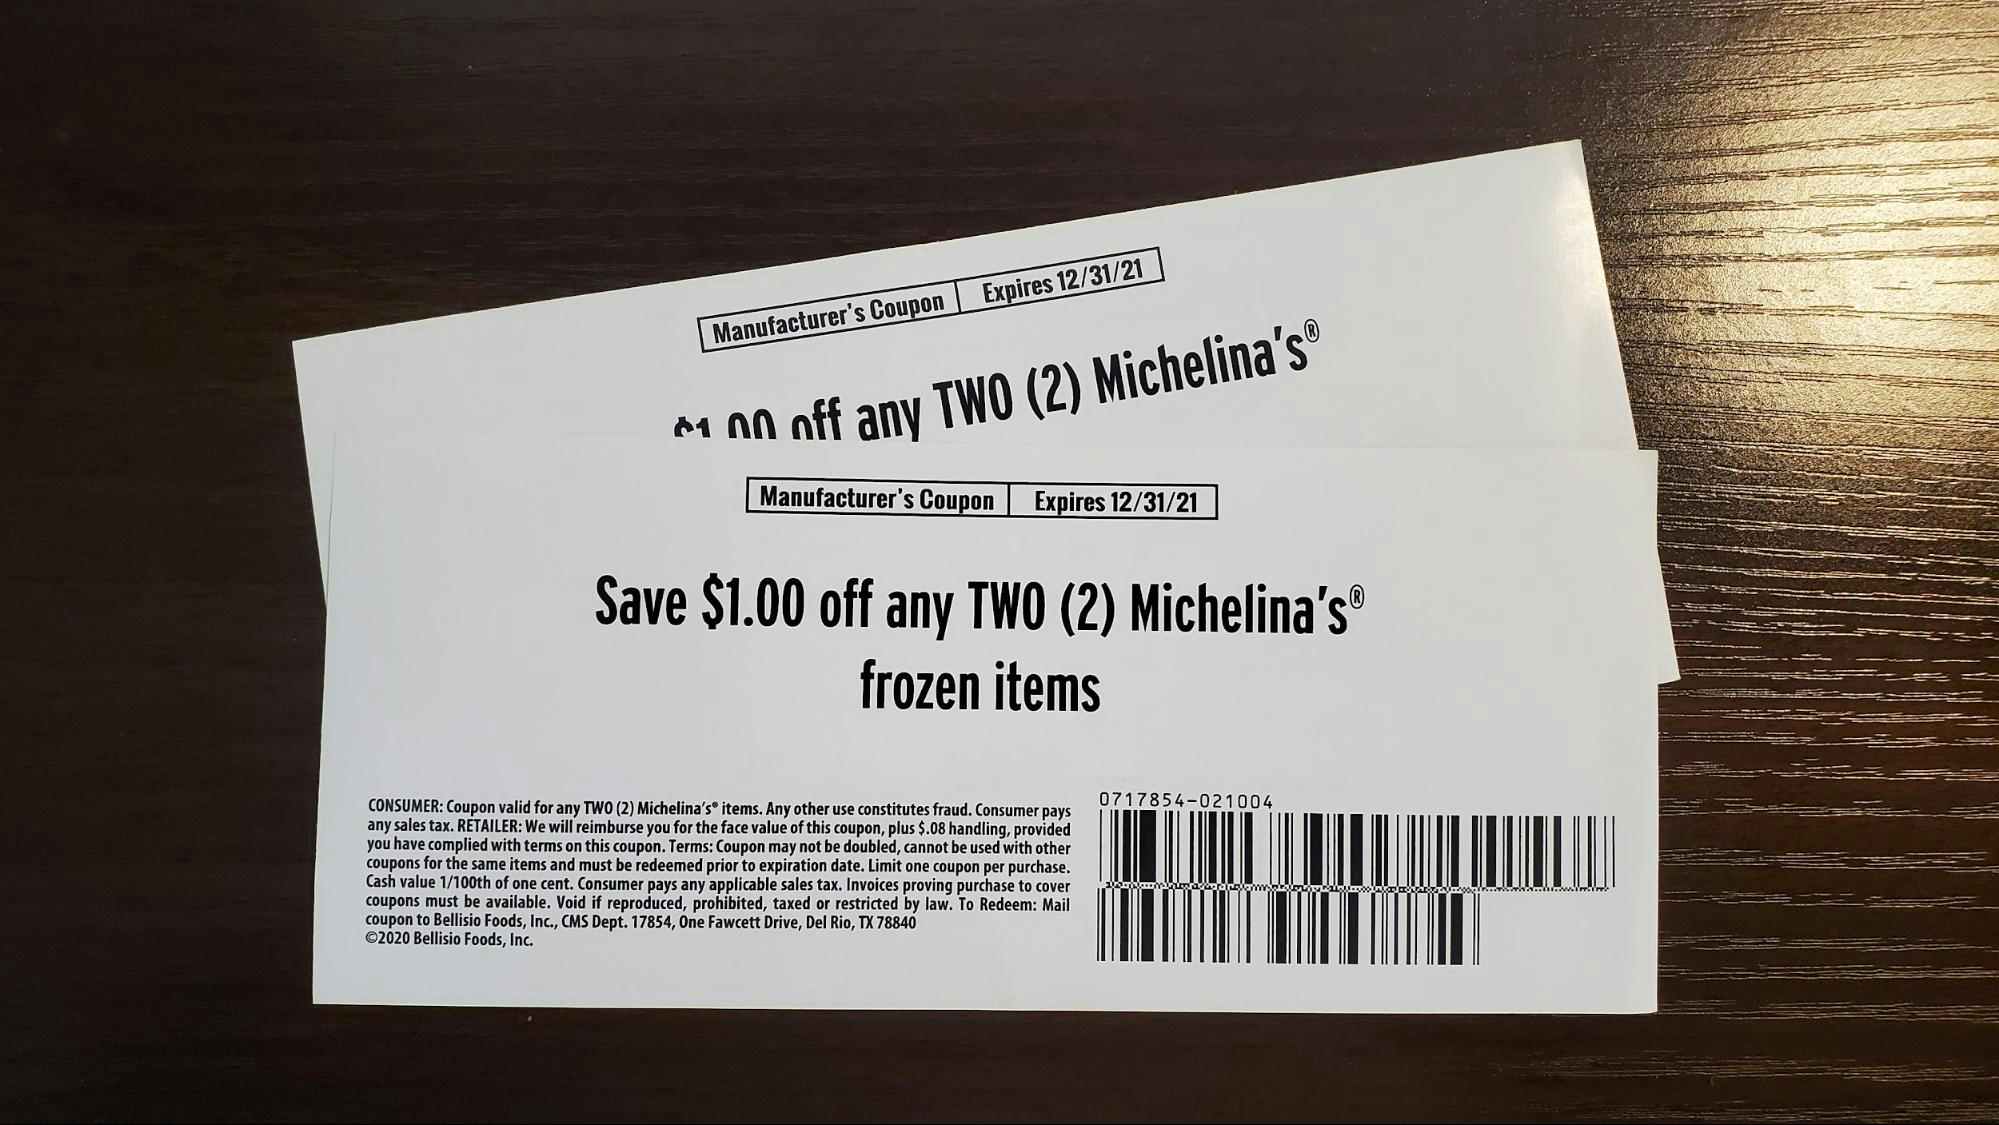 49 Companies That'll Send You Free Coupons by Mail - The Krazy